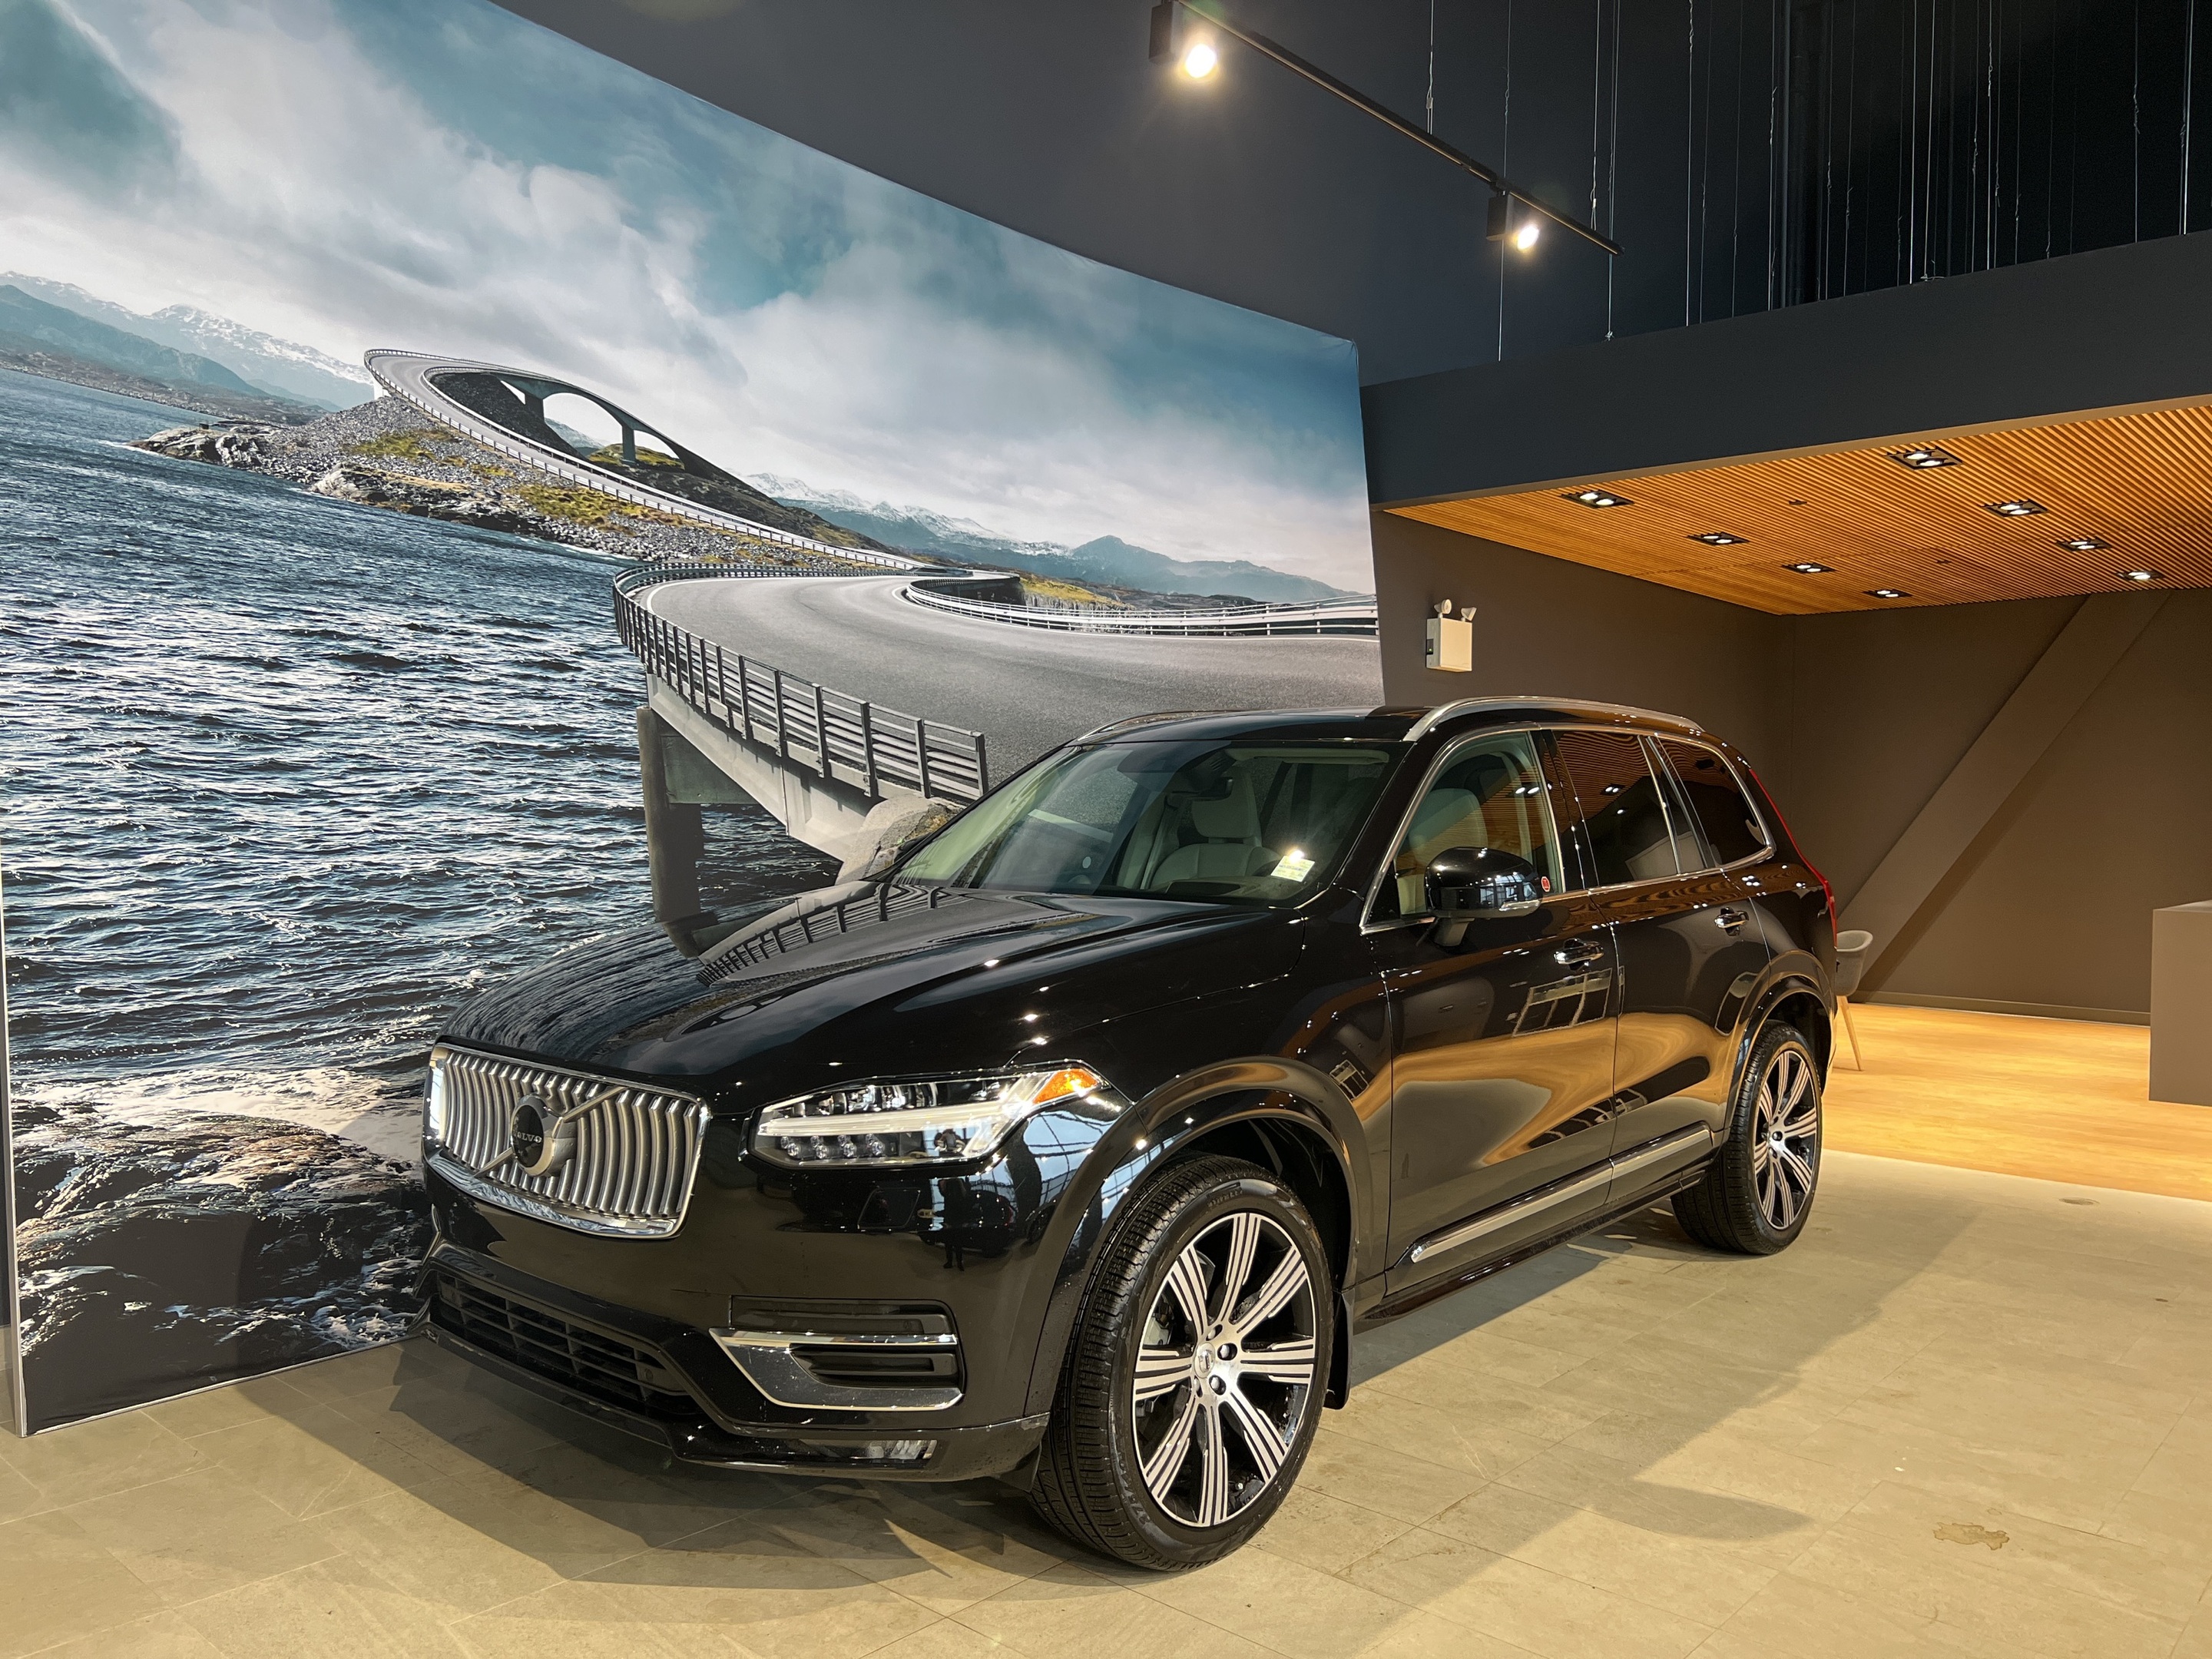 2021 Volvo XC90 T6 AWD Inscription (7-Seat) FROM 3.99%